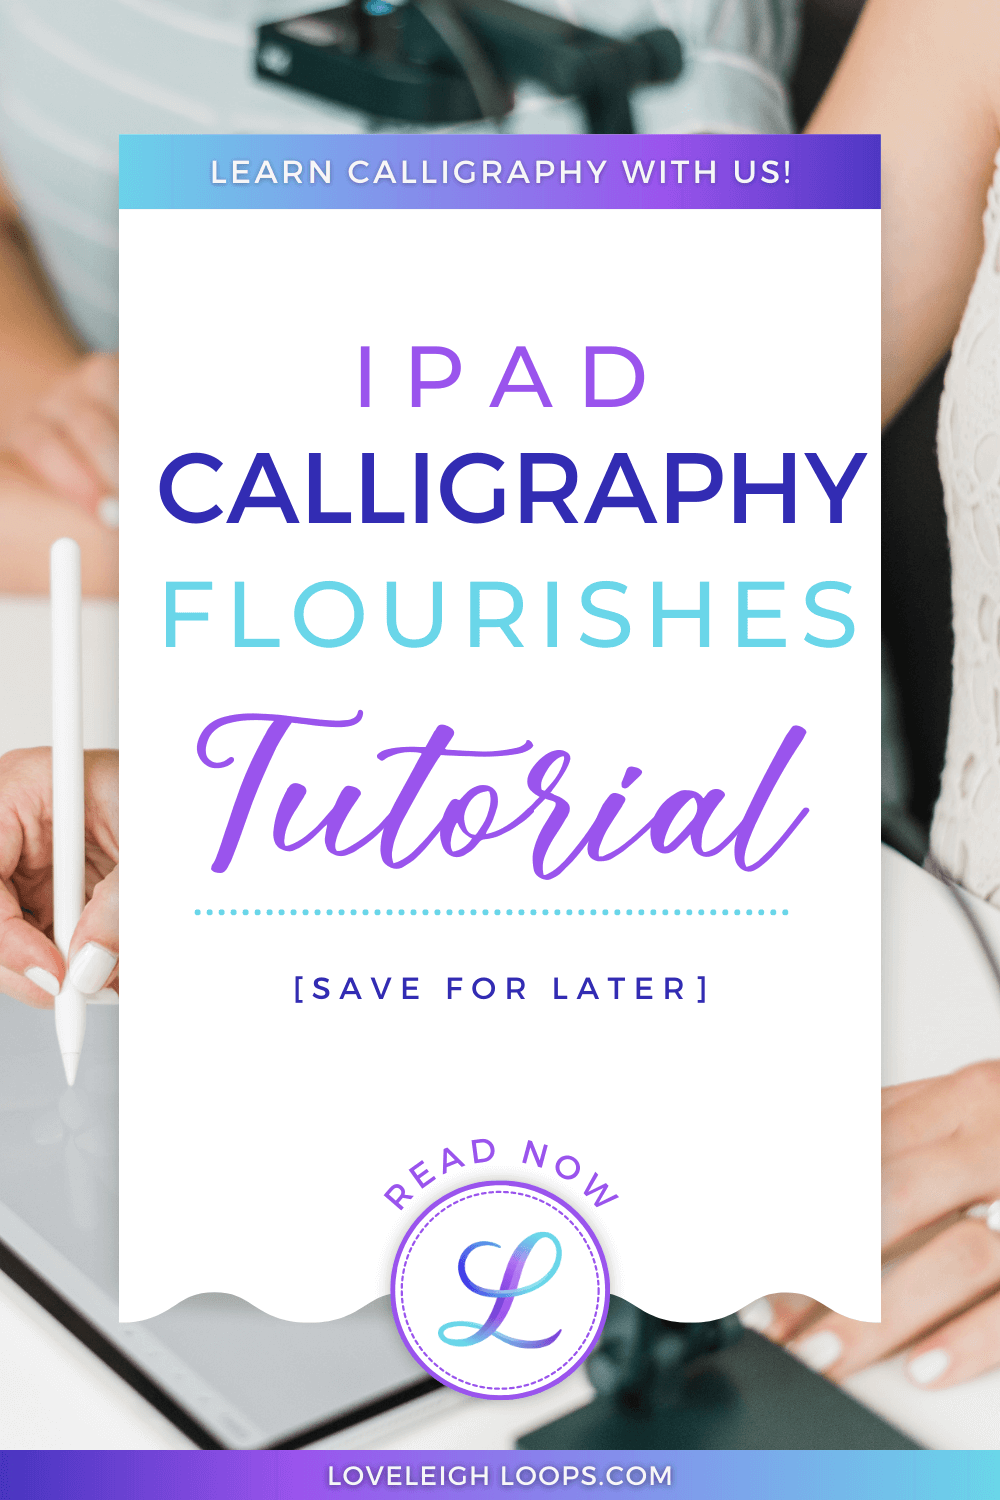 Calligraphy 101 - The ULTIMATE Guide For Beginners (link in comment) : r/ Calligraphy